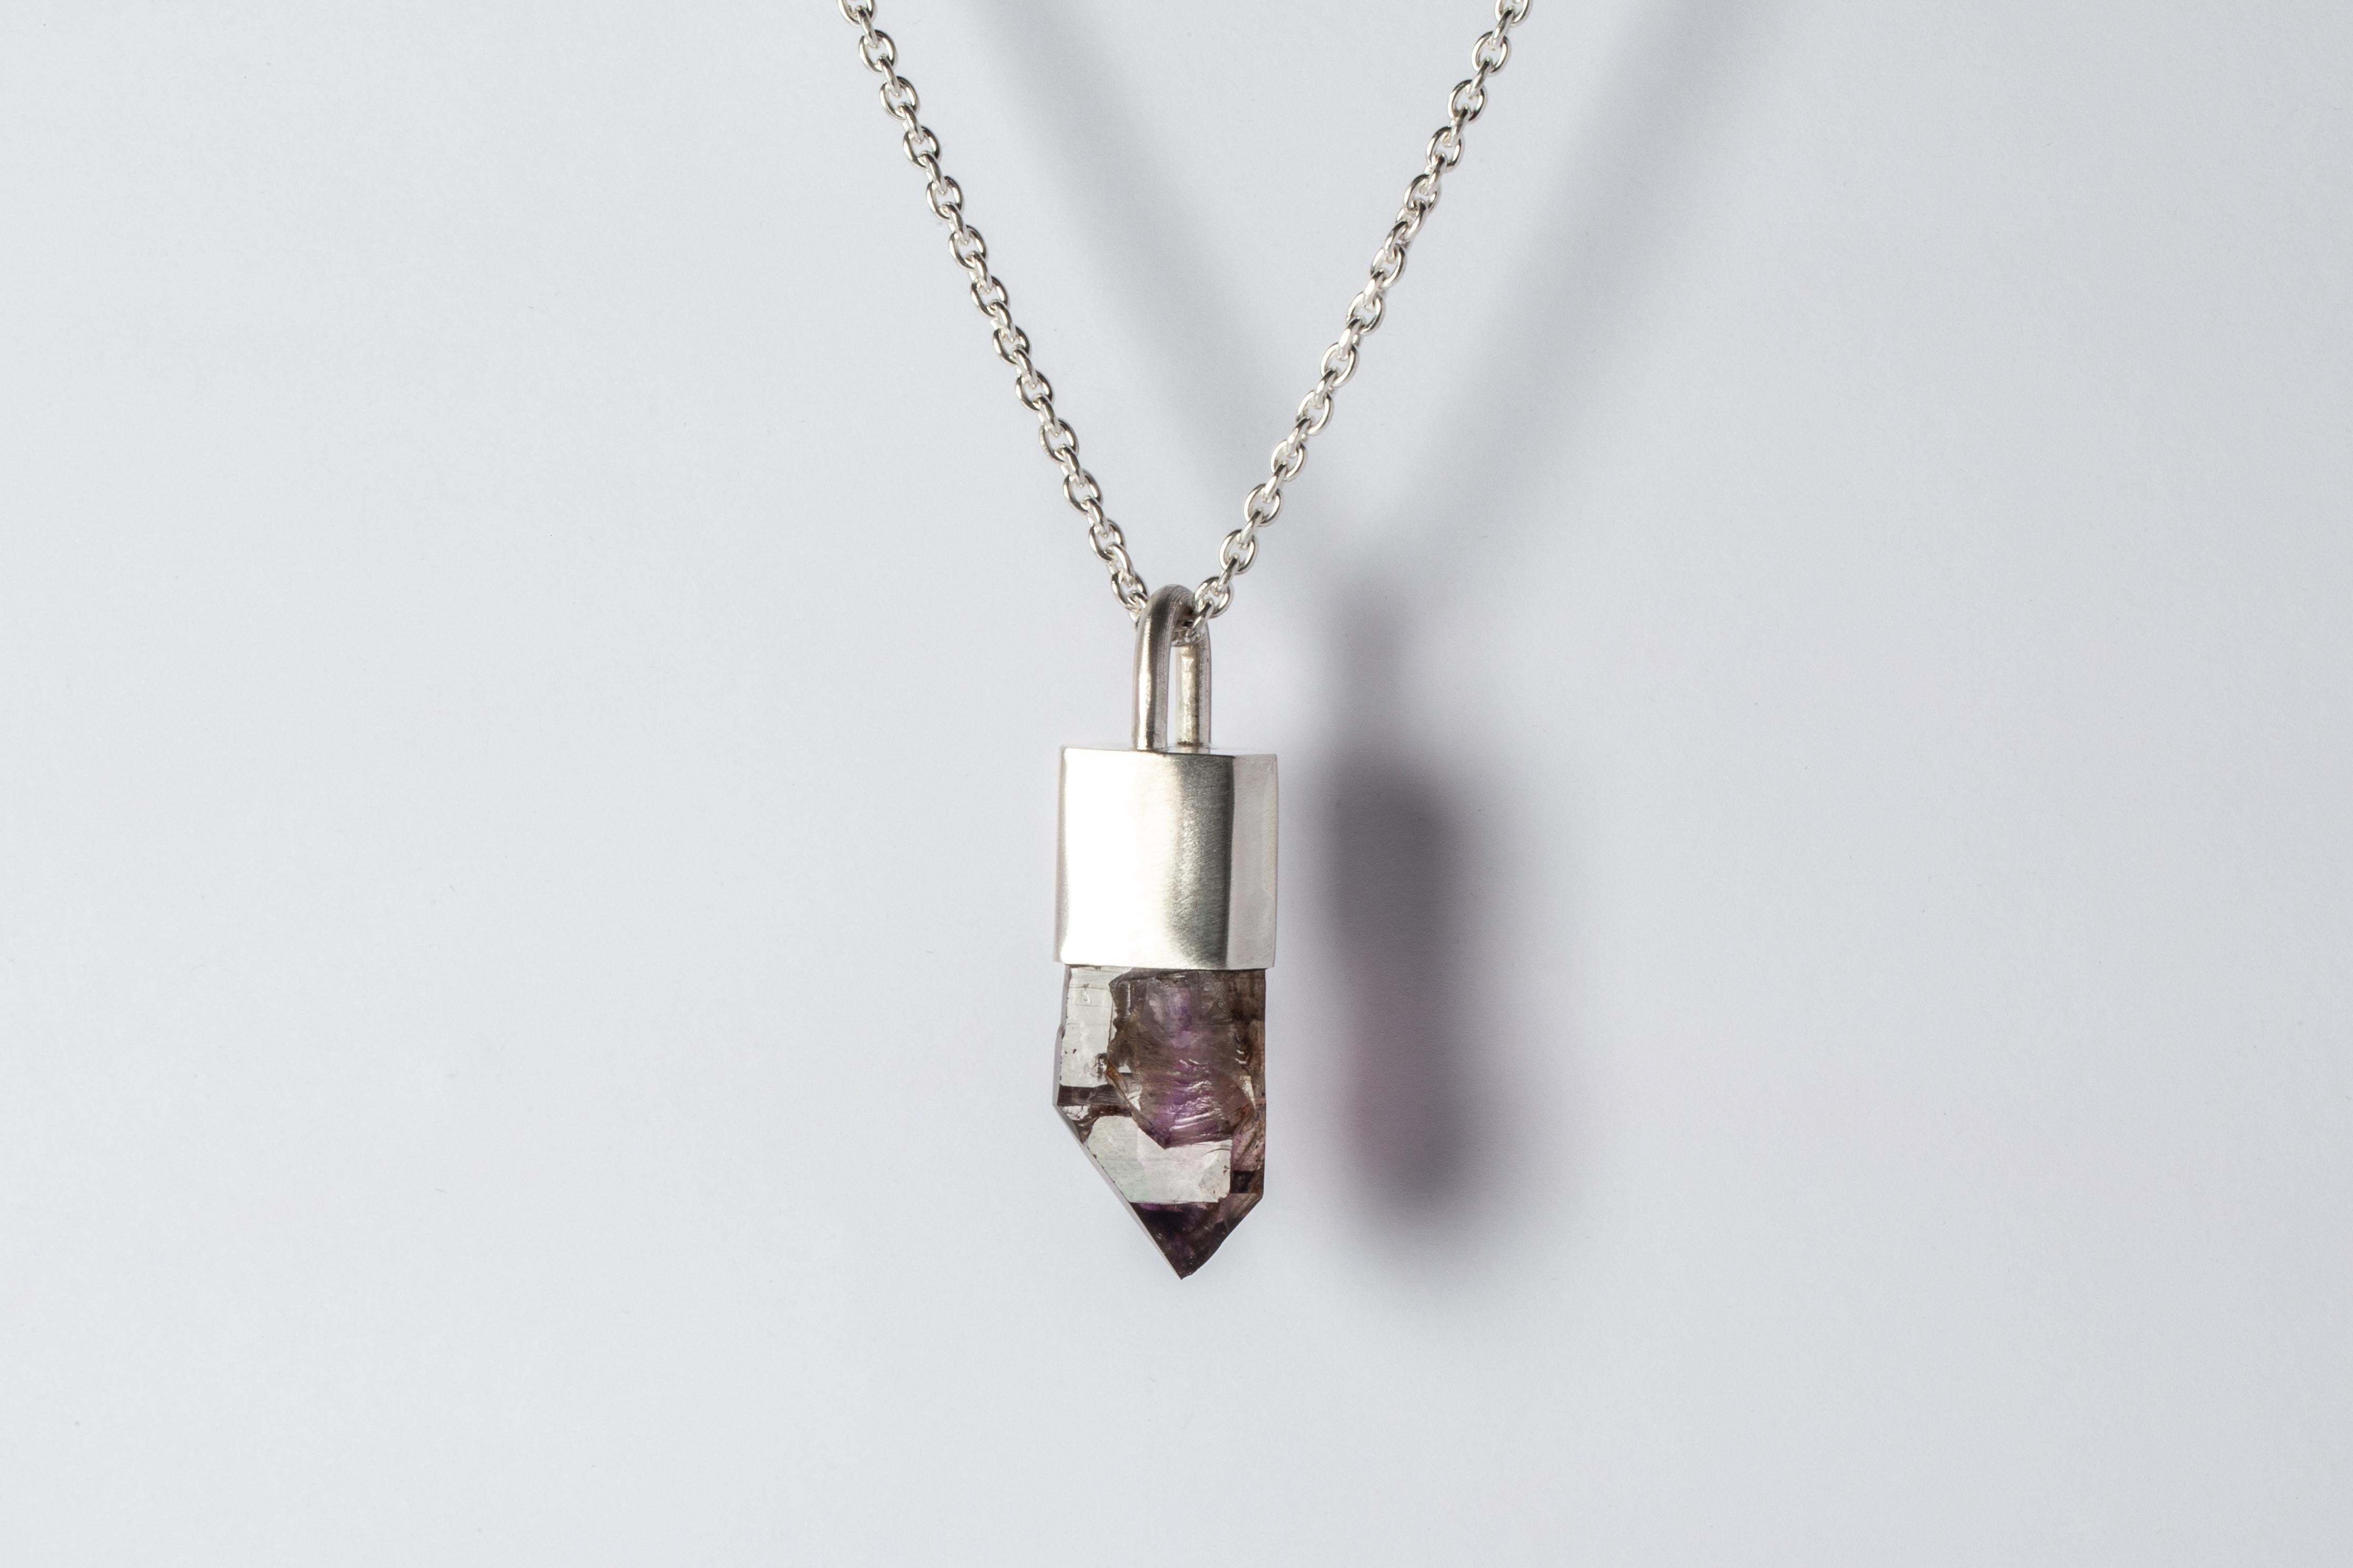 Talisman necklace in matte sterling silver and a rough of brandberg quartz. The Talisman series is an exploration into the power of natural crystals. The crystals used in these pieces are discovered through adventure and are hand selected. Each